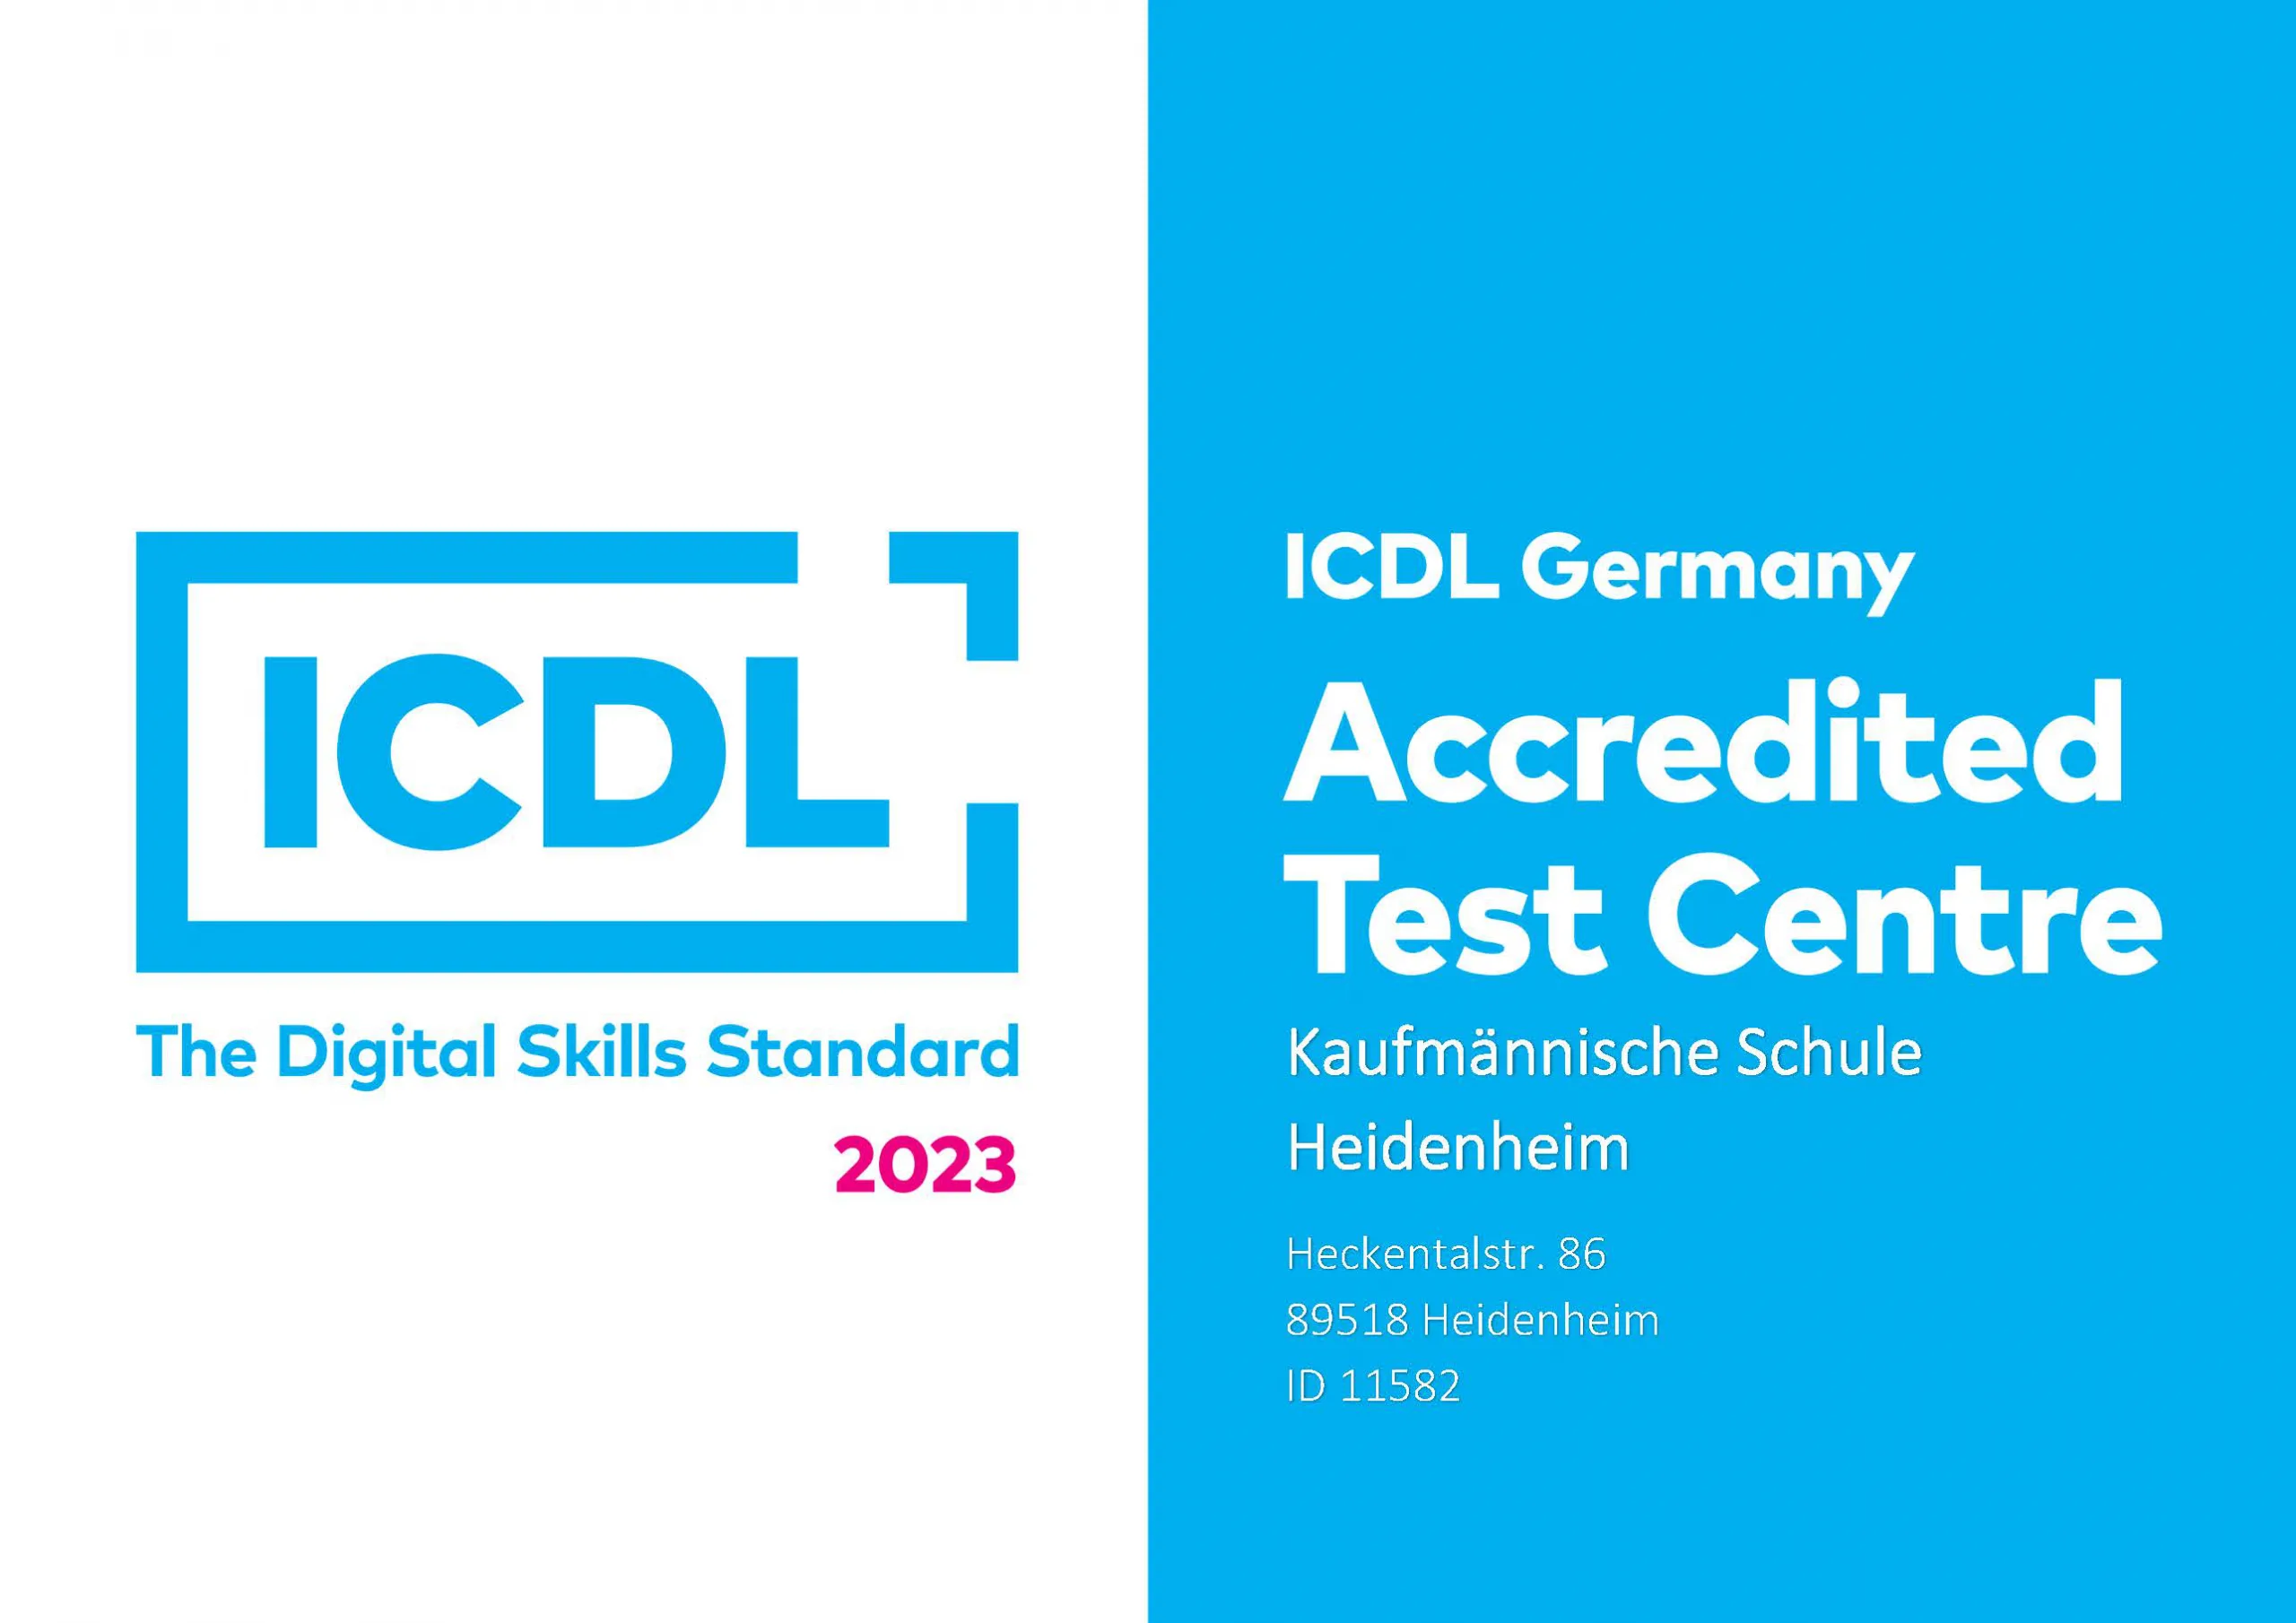 ICDL Germany Accredited Test Centre KSH